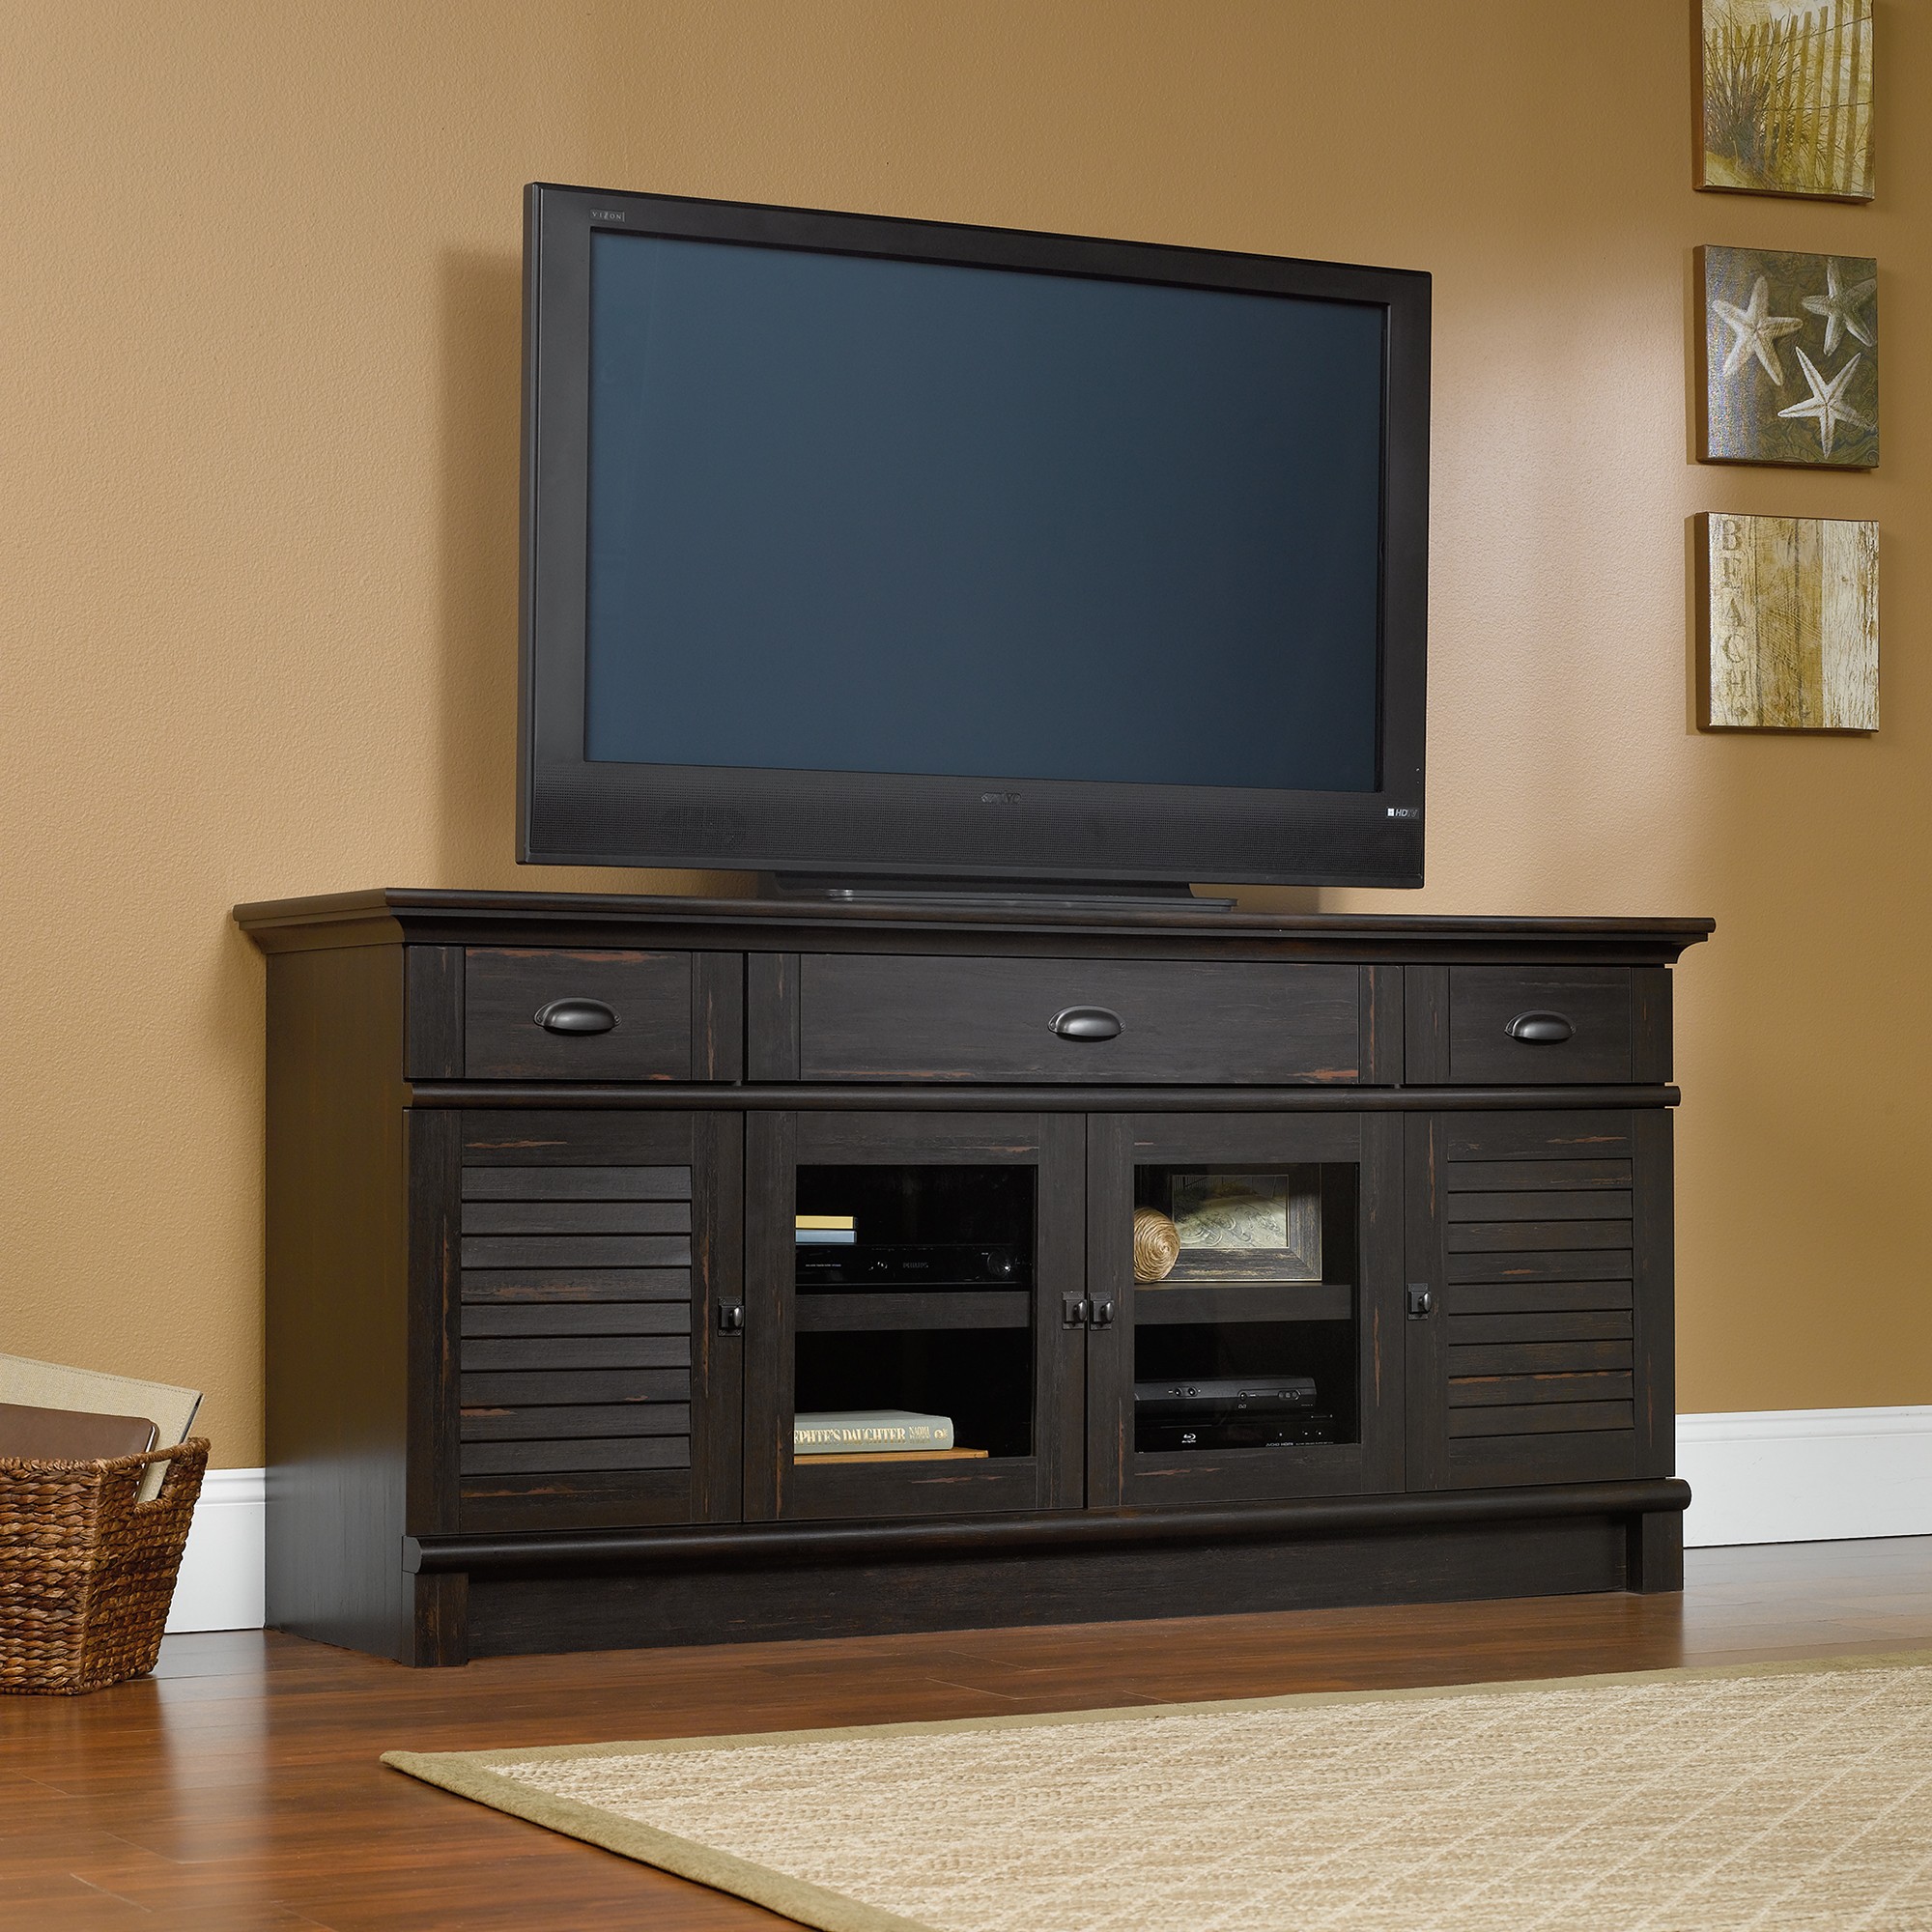 Sauder Harbor View Credenza Tv Stand 415374 The Furniture Co